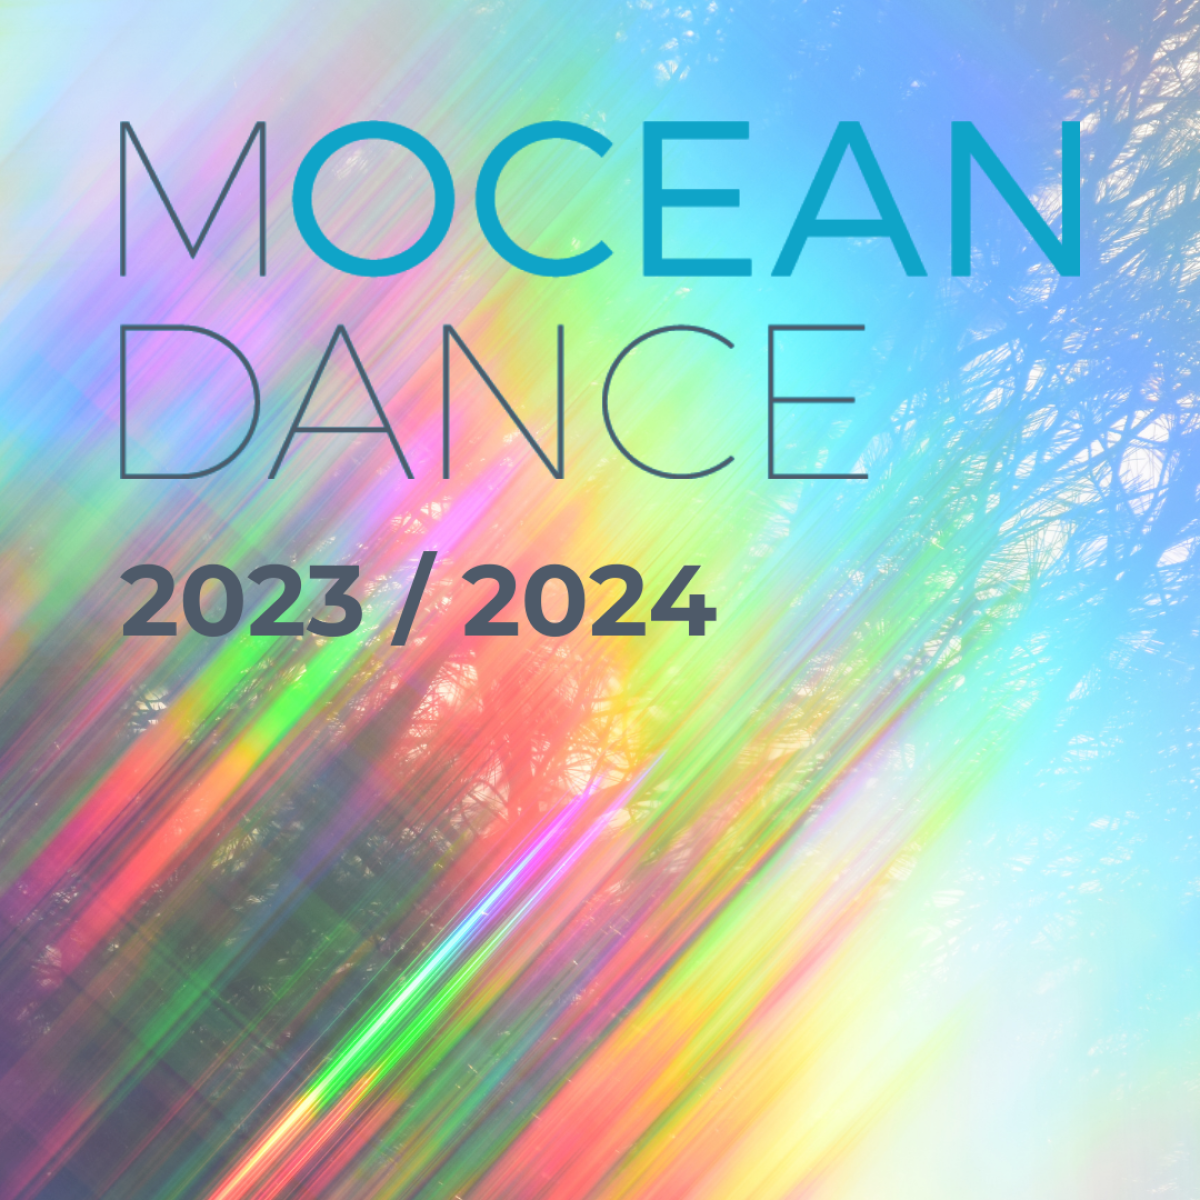 Rainbow prism colours with text: Mocean Dance 2023/2024